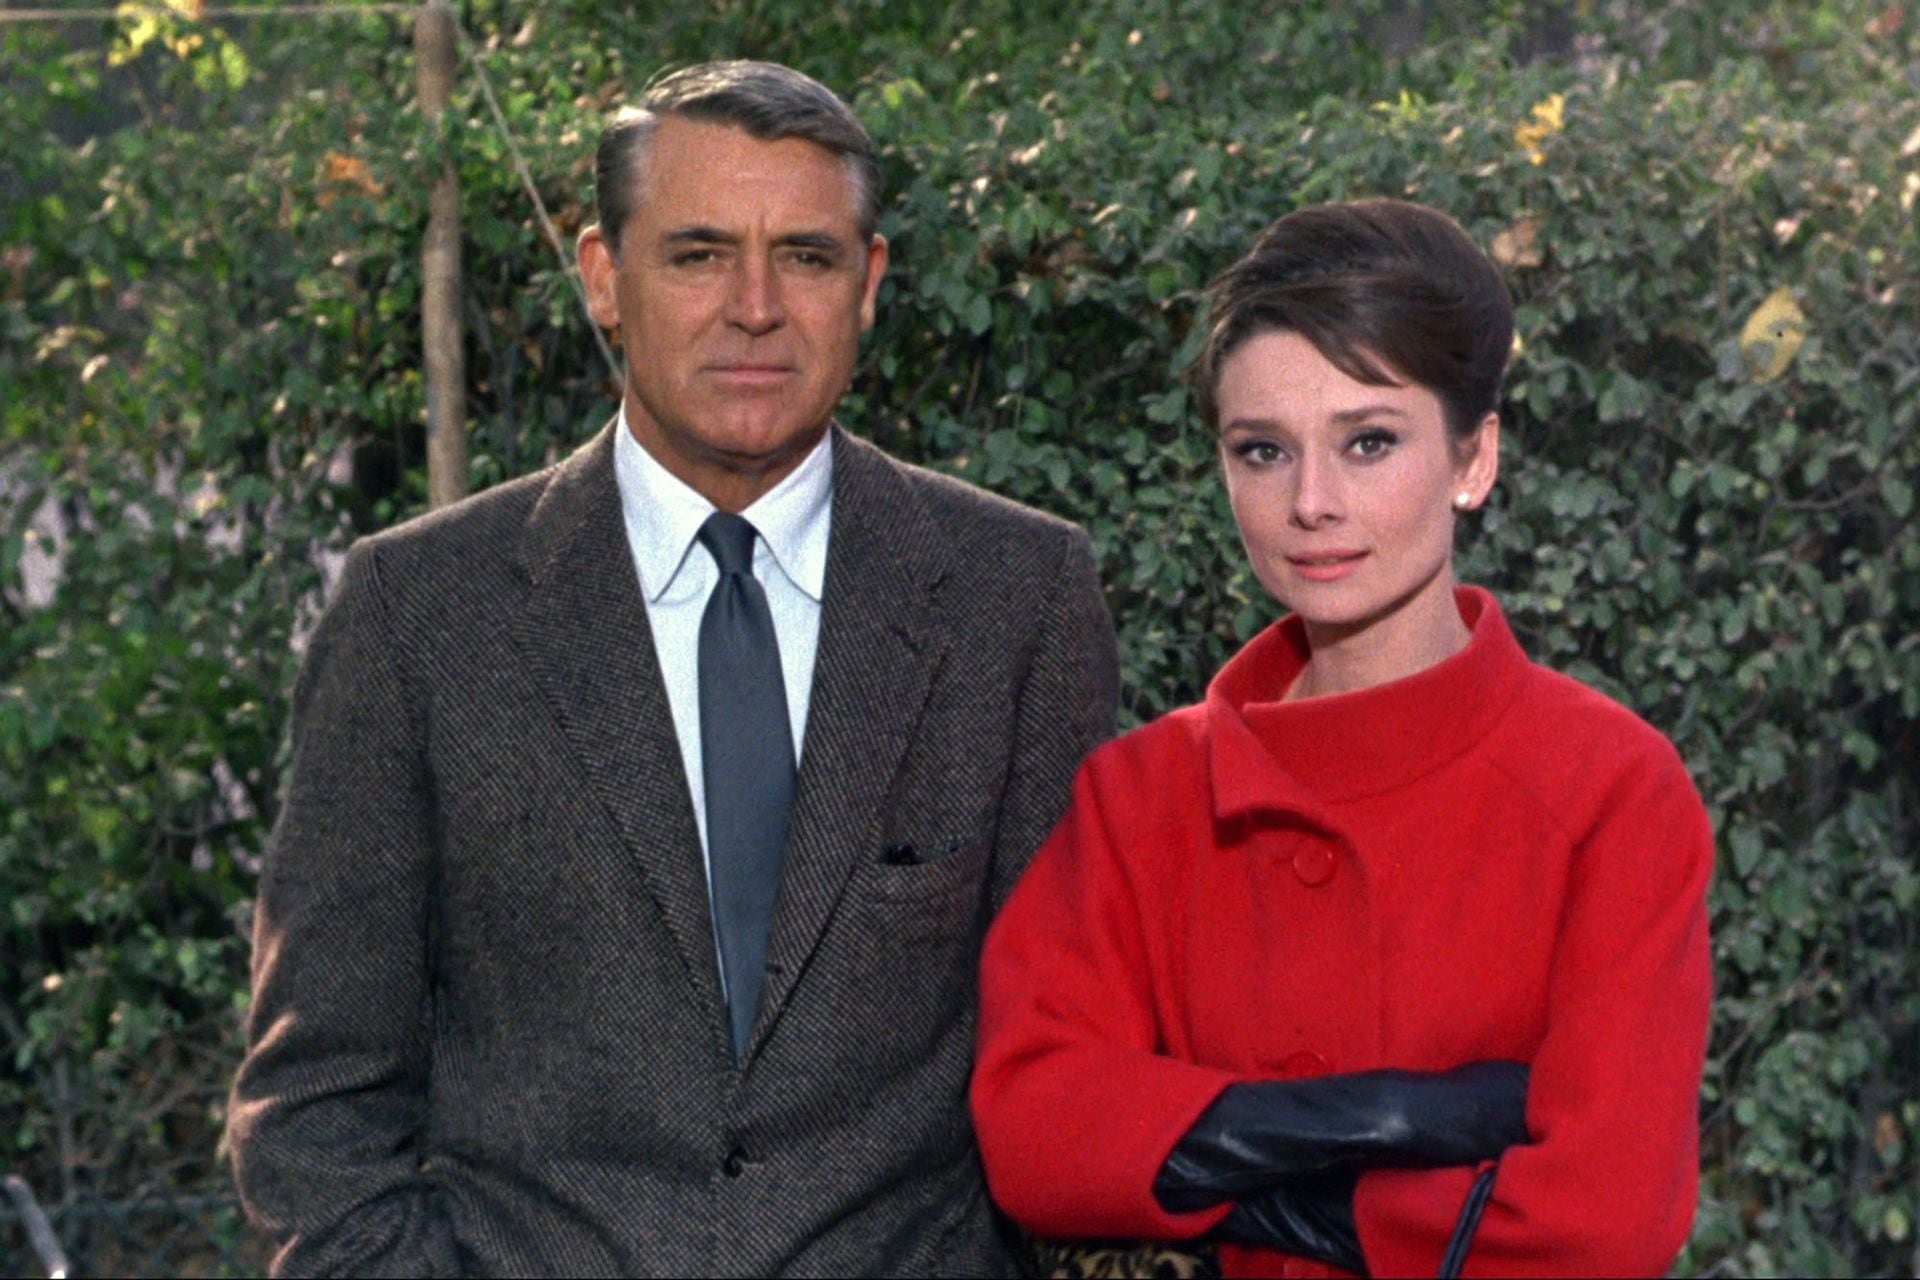 In Charada, with Cary Grant